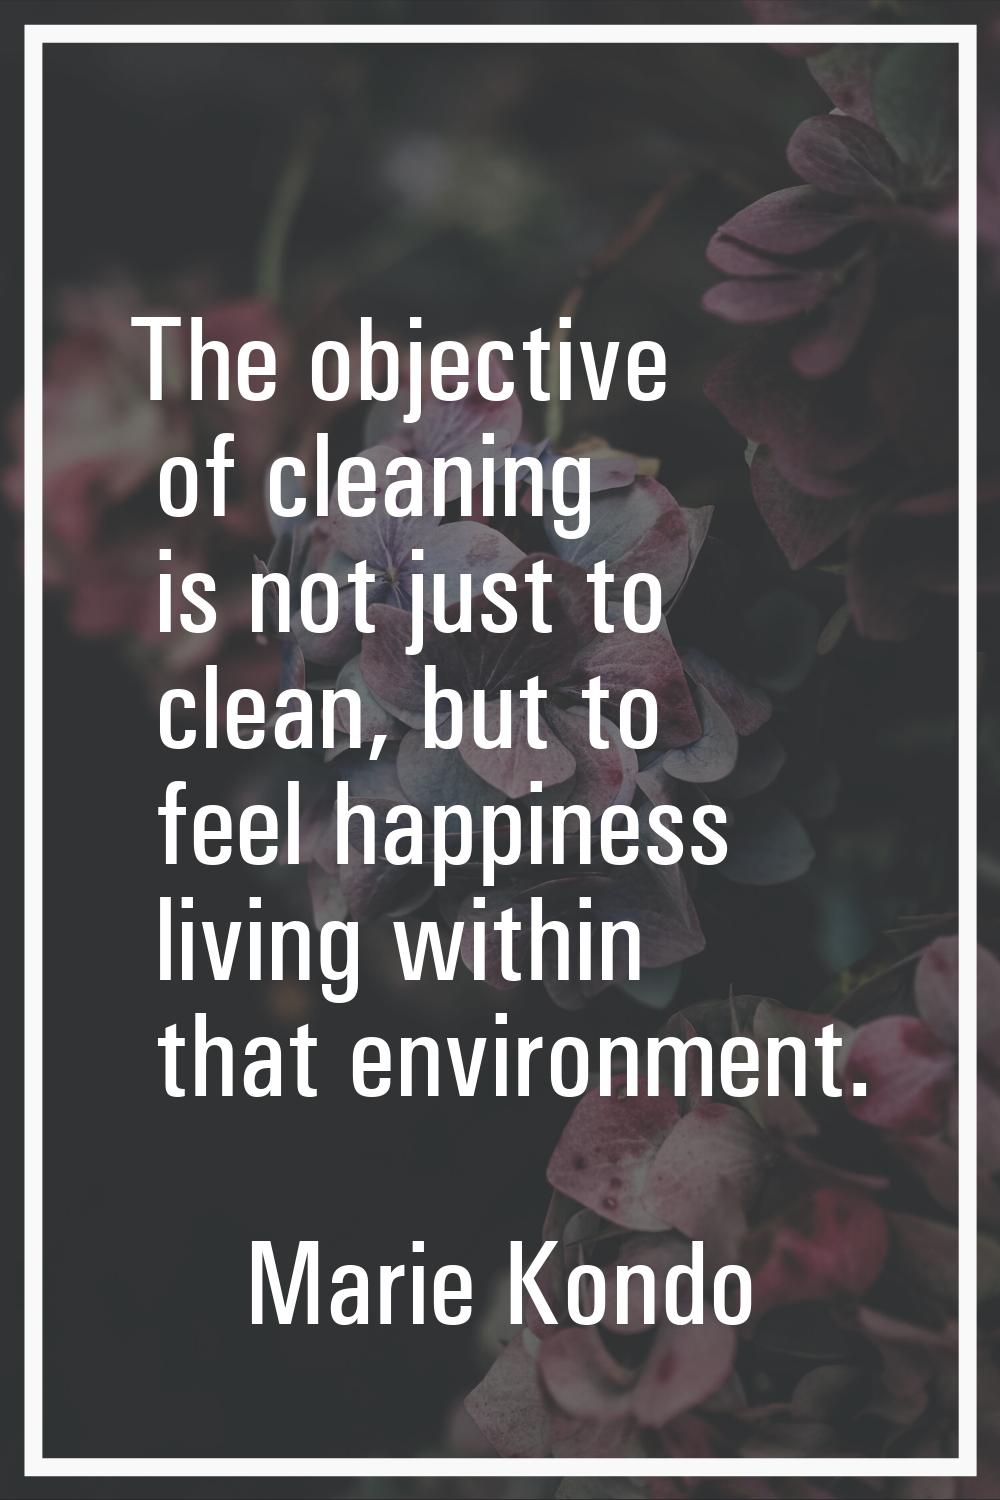 The objective of cleaning is not just to clean, but to feel happiness living within that environmen